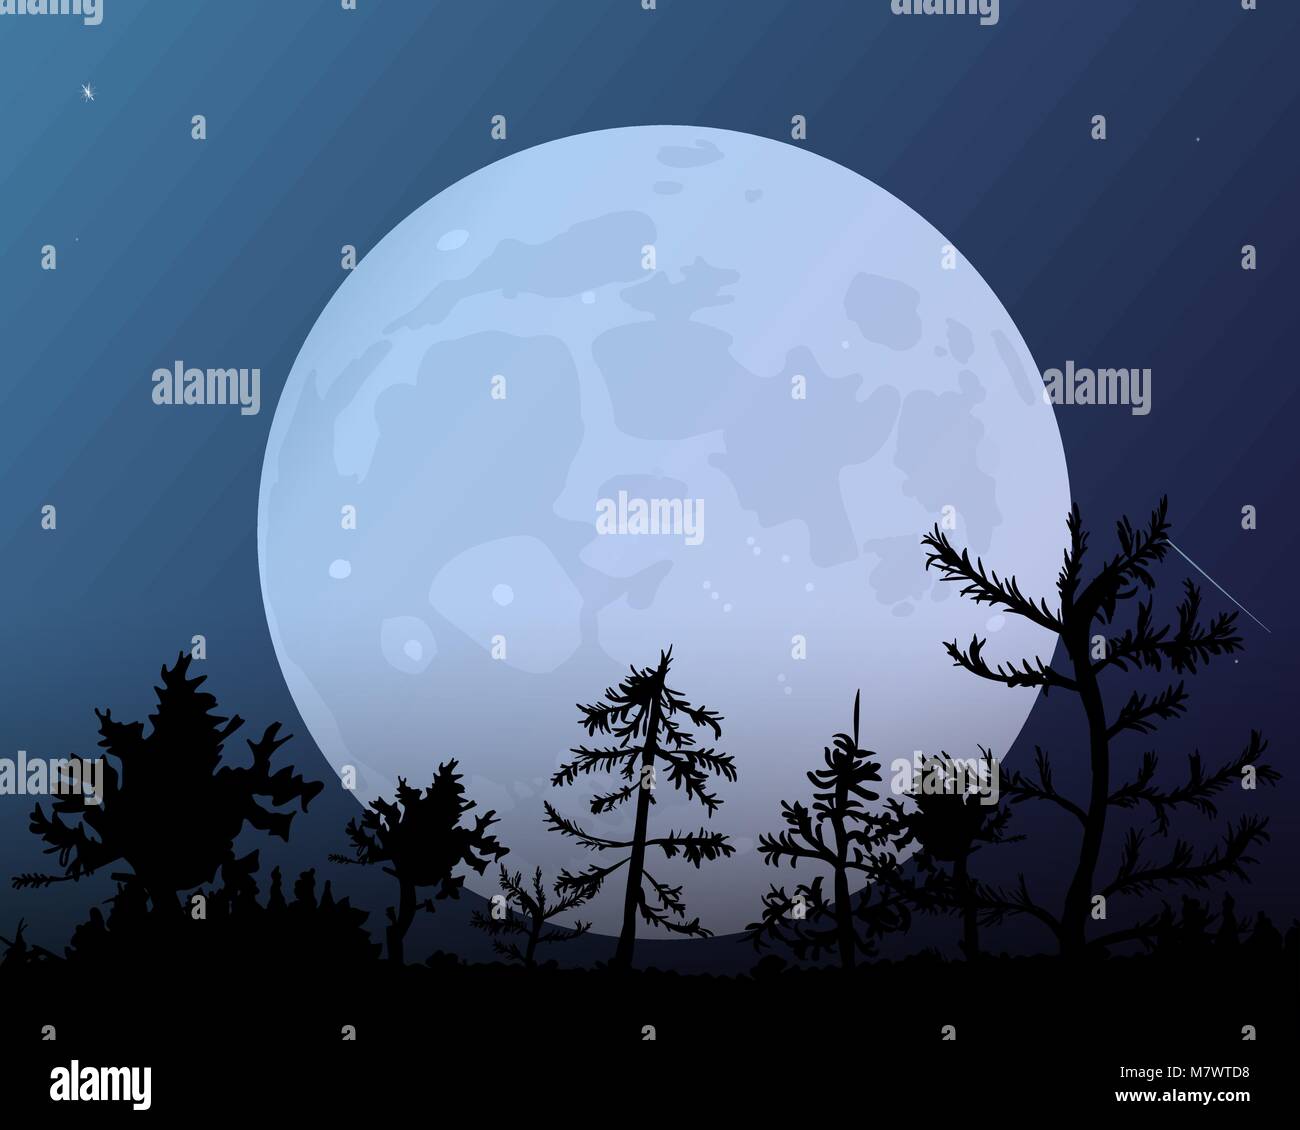 The Forest On The Background Of The Huge Moon Dark Blue Night Sky